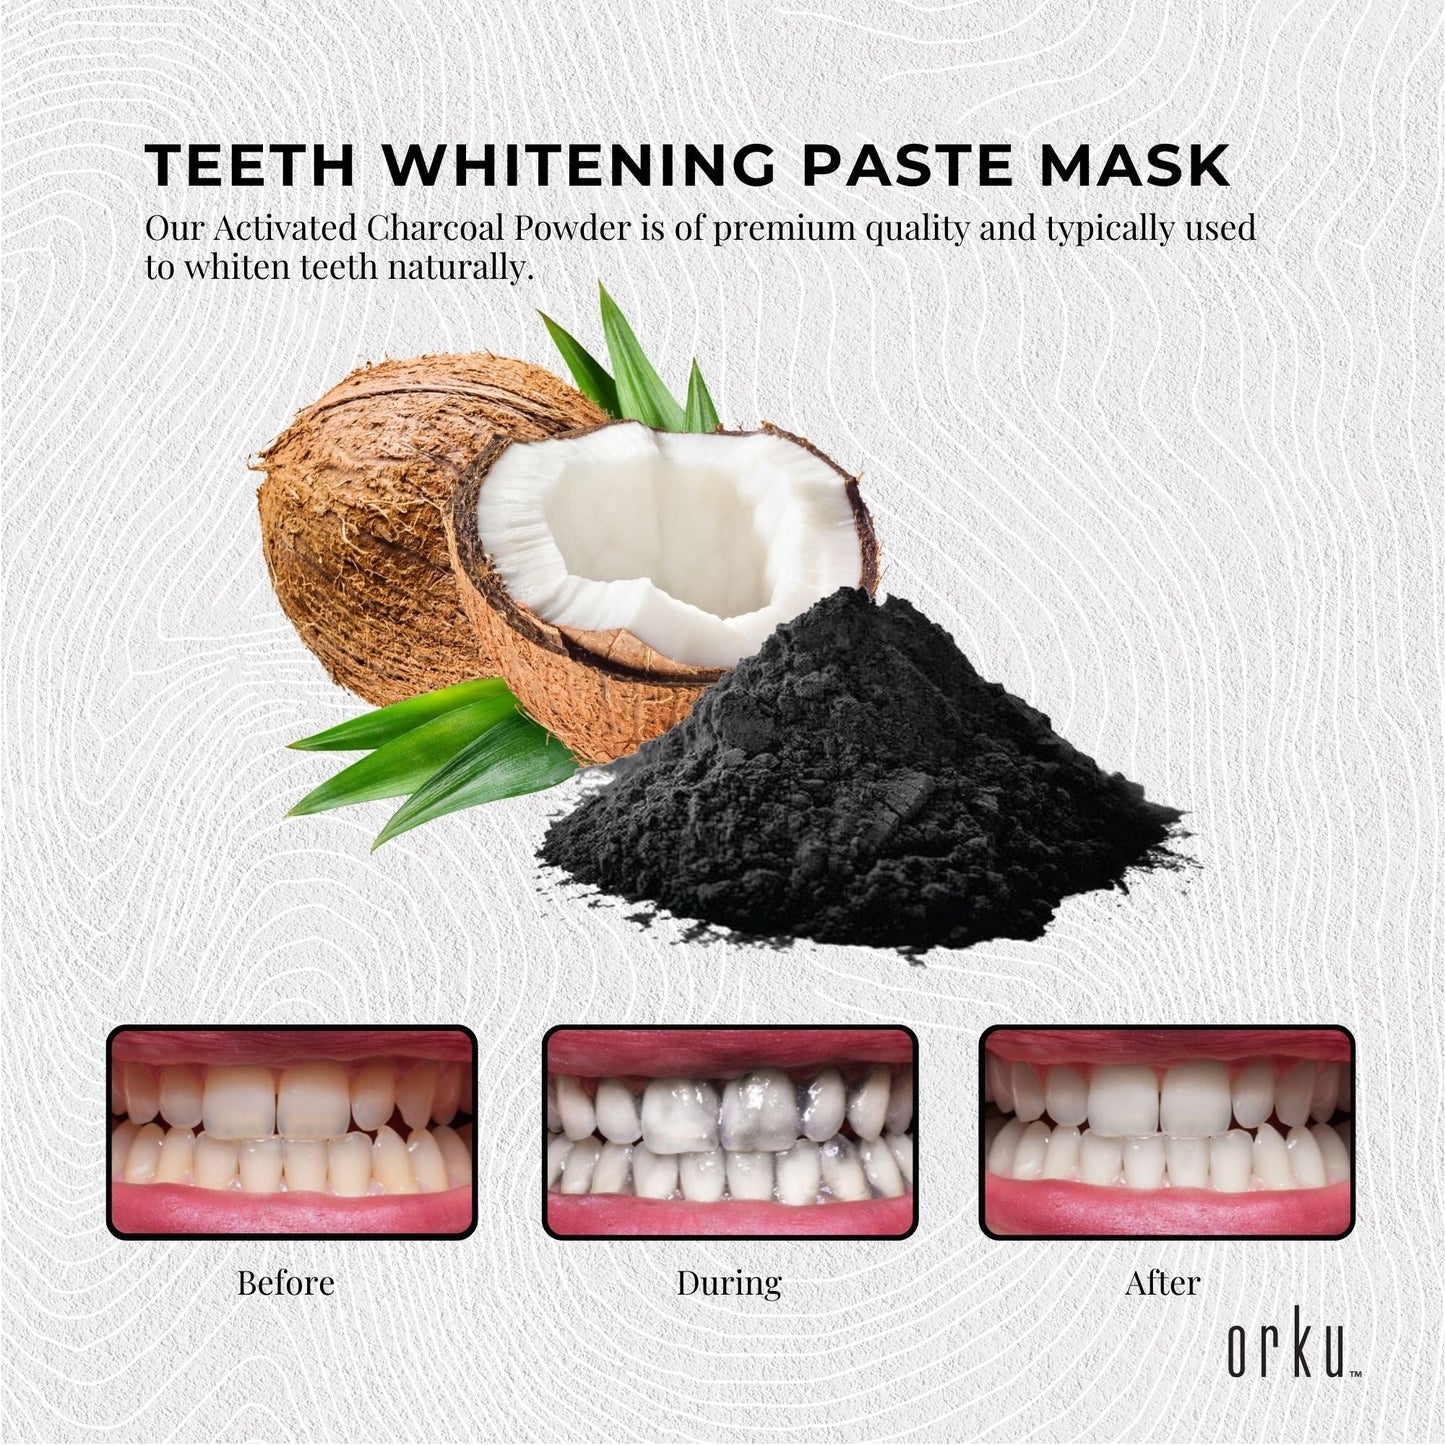 10Kg Activated Carbon Powder Coconut Charcoal - Teeth Whitening + Skin